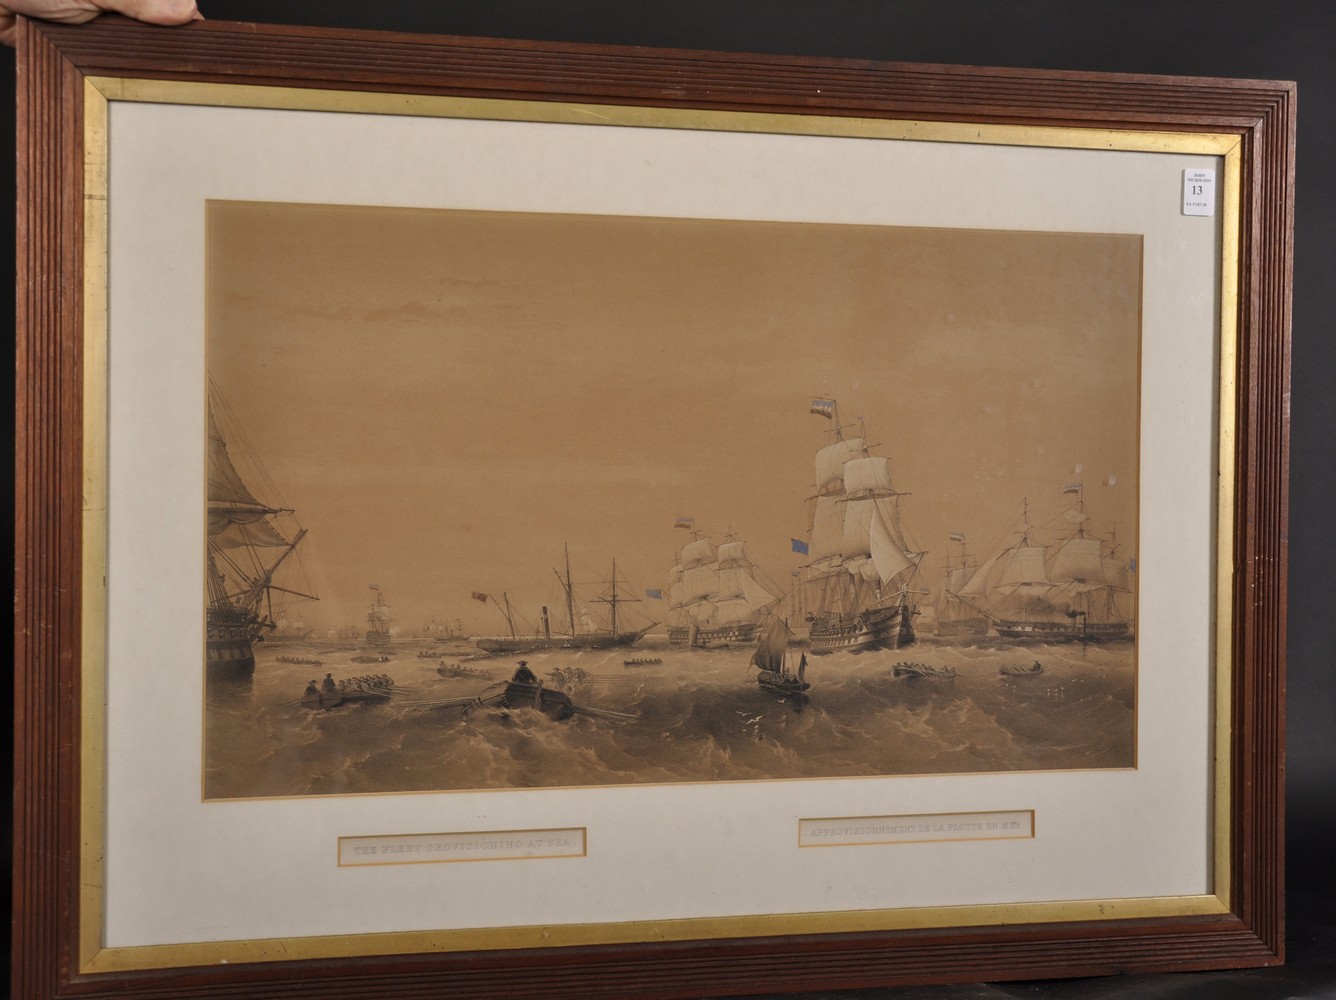 Oswald Walters Brierly (1817 - 1894) British. The Fleet Provisioning at Sea, Lithograph, 13.5" x - Image 2 of 3